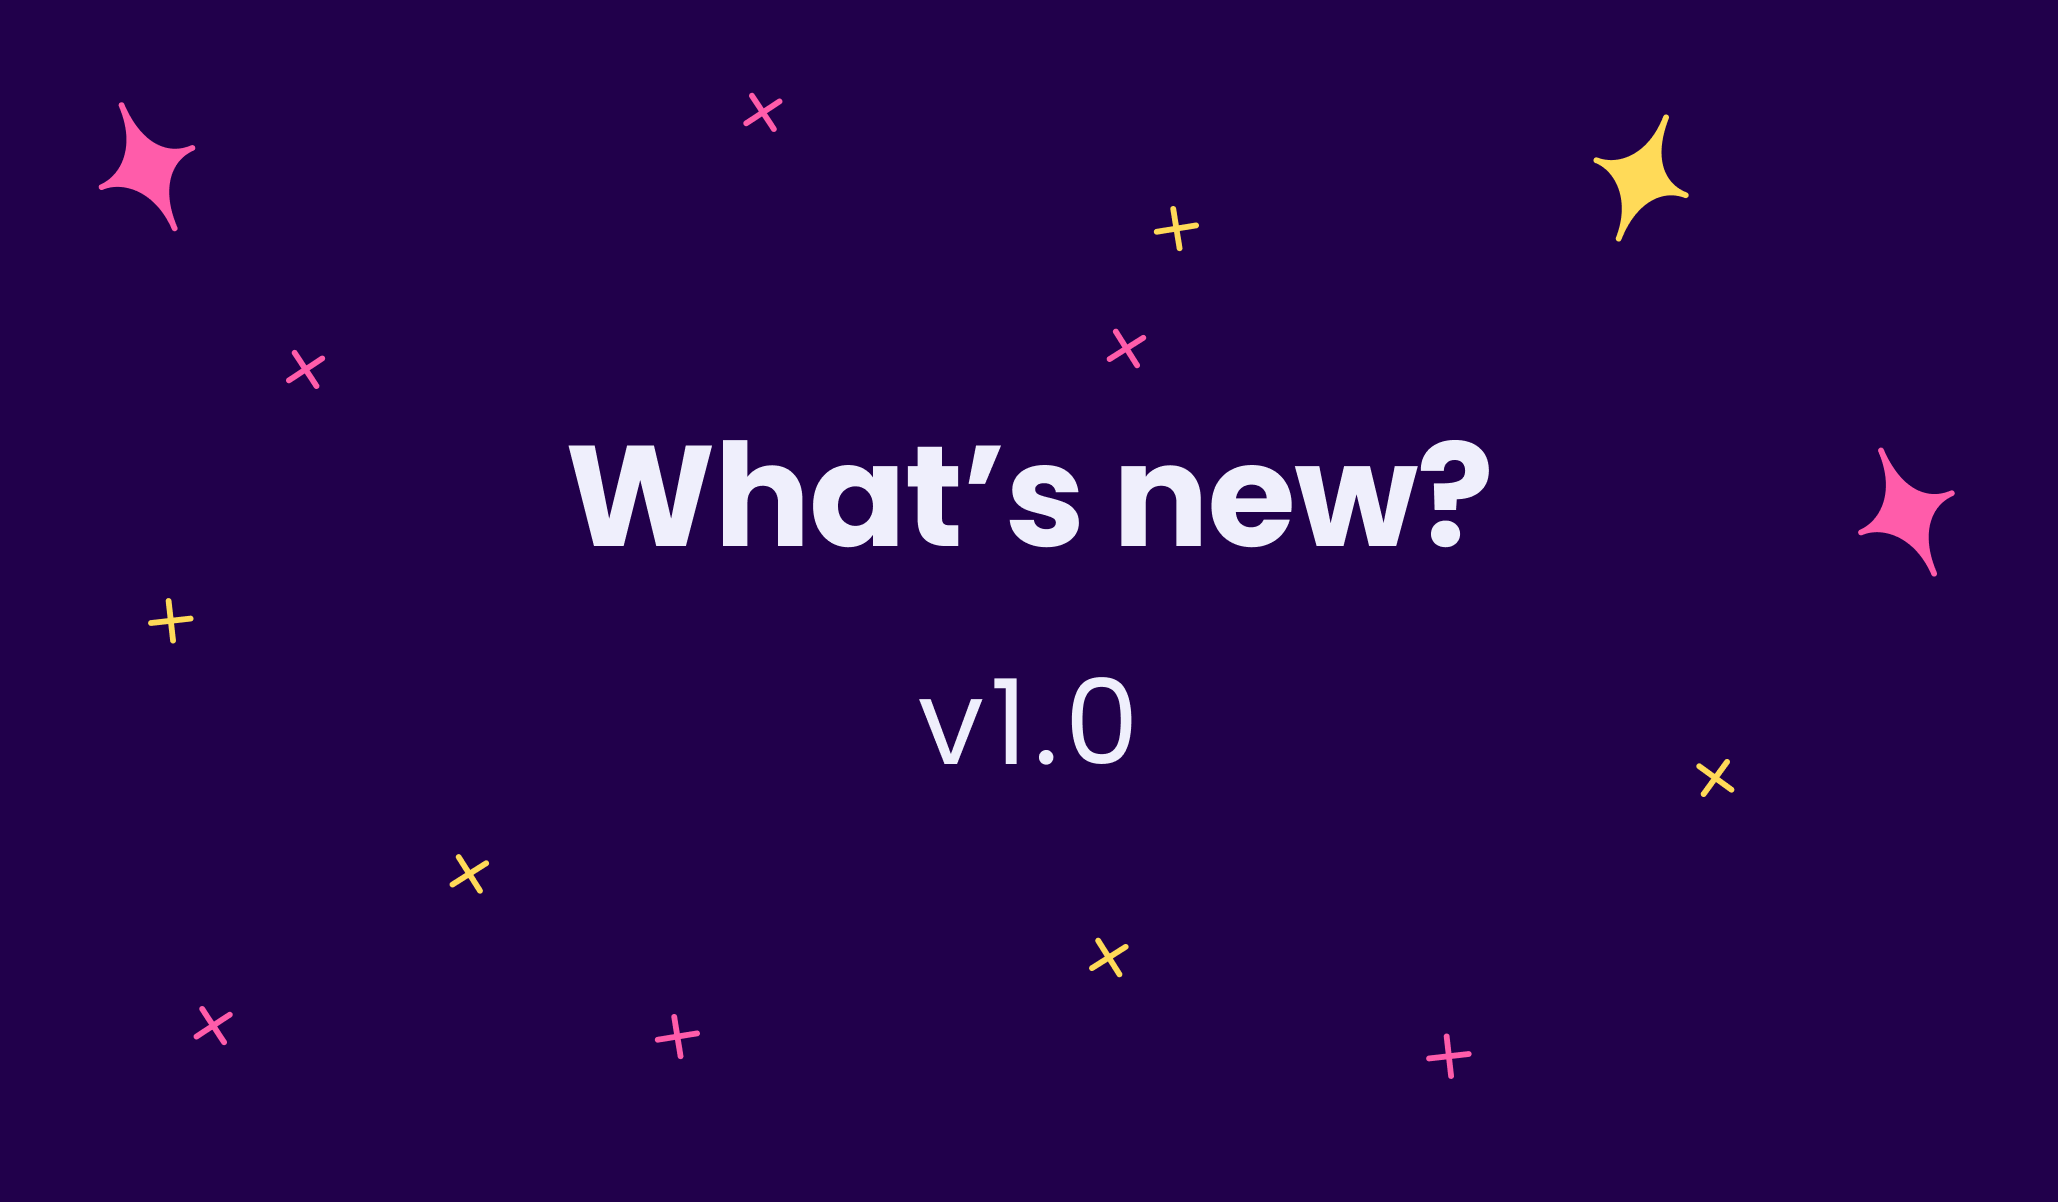 What’s new in v1.0